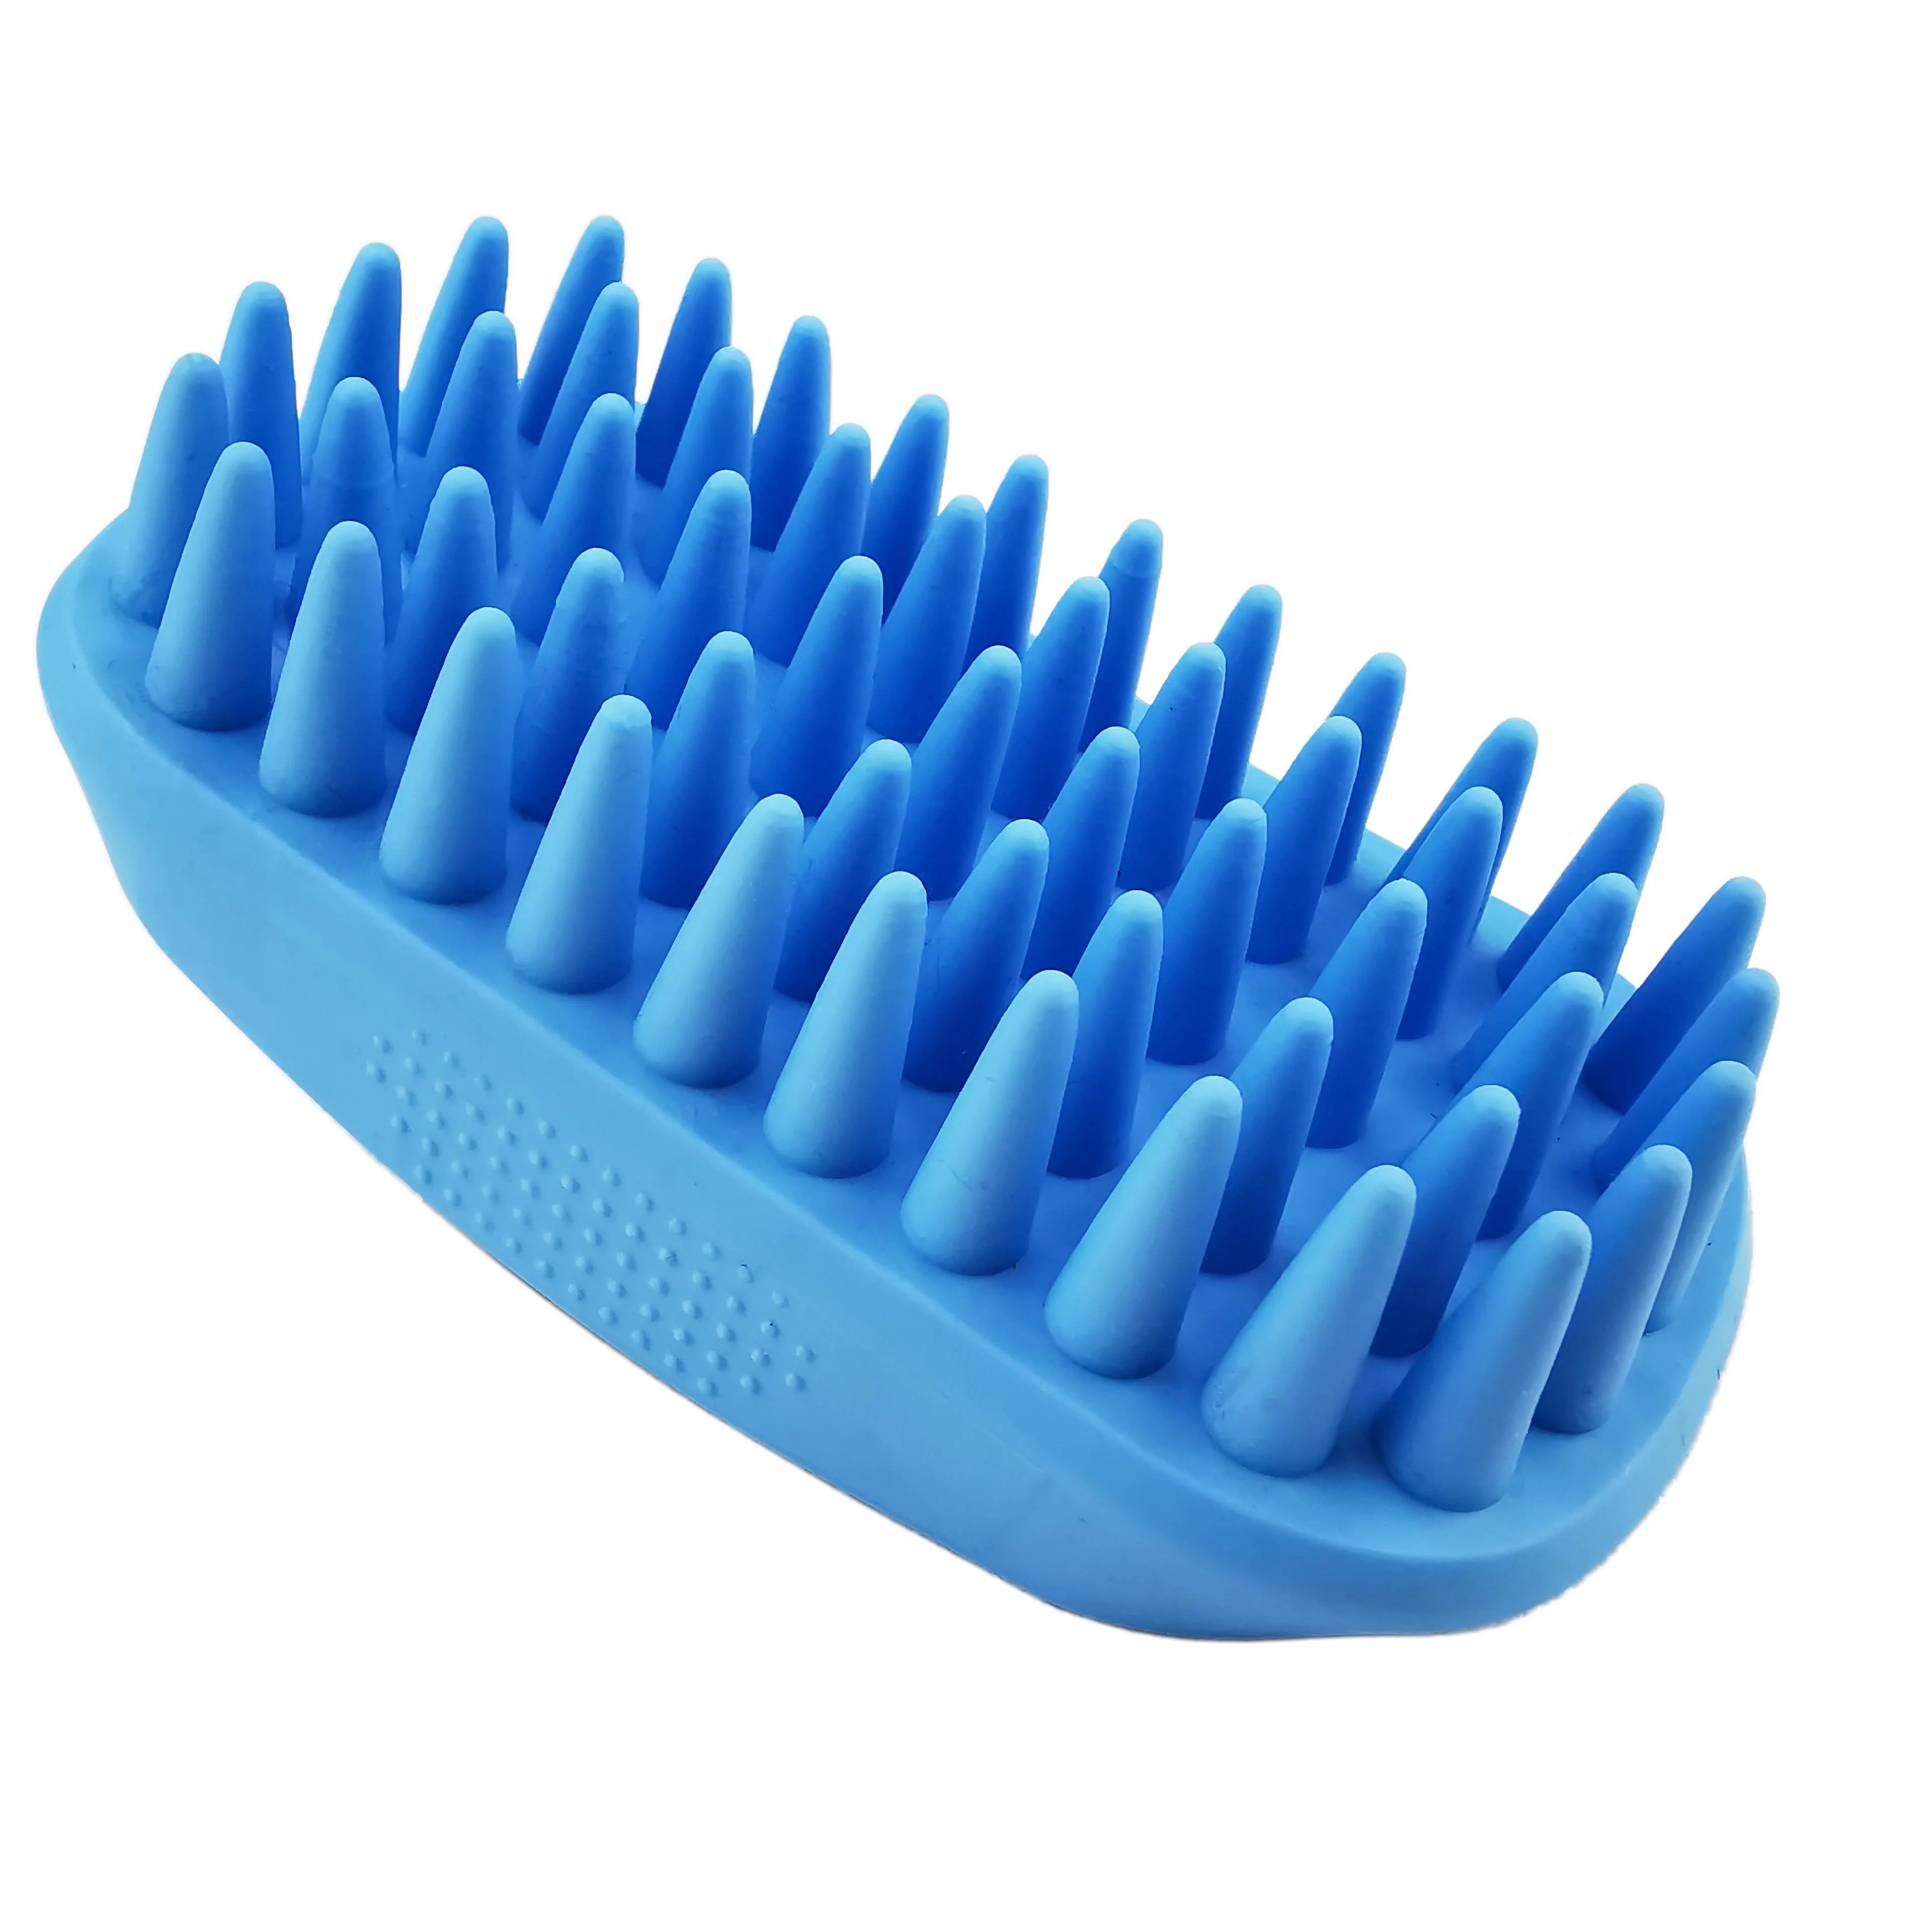 

Pet Supplies Products Bath Massage Brush Grooming Comb For Shampooing Massaging Dogs Cats Small Animals With Short Or Long Hair, Blue